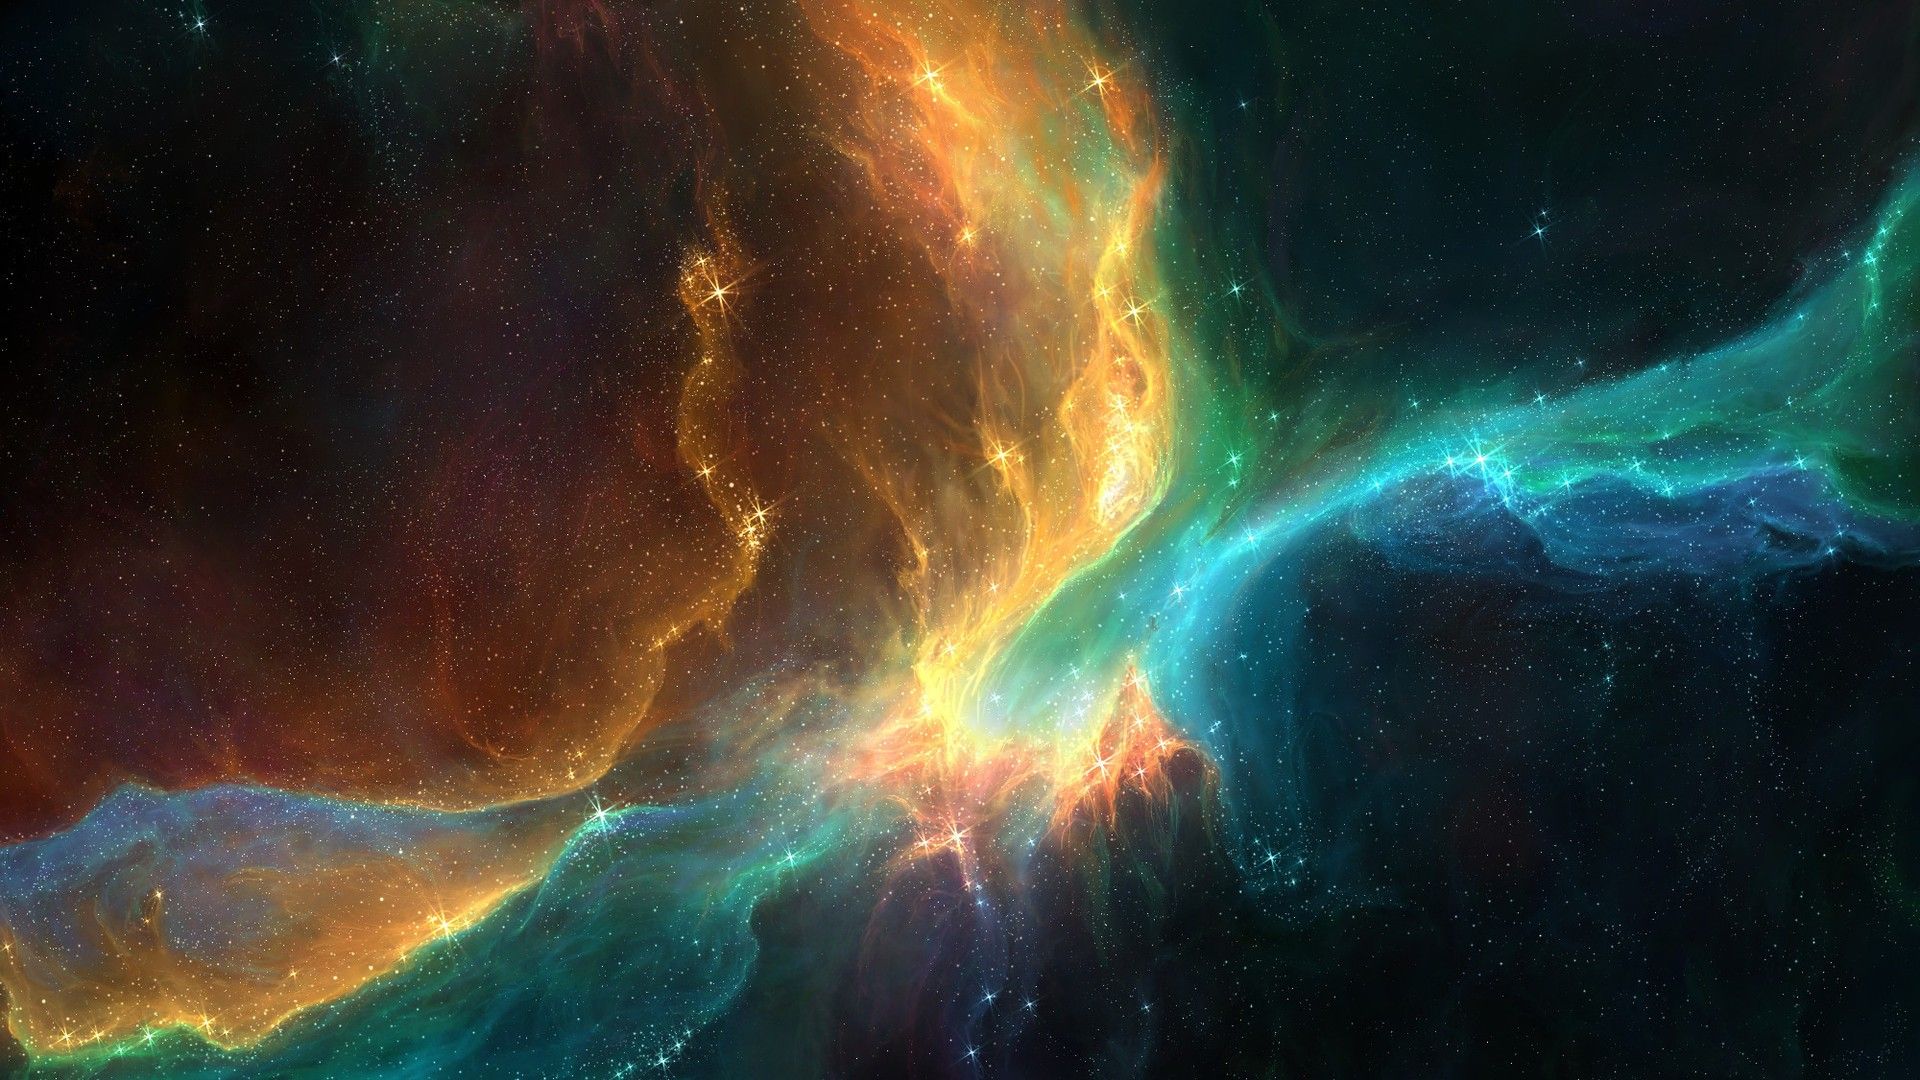 Nebula Space Art HD Digital Universe 4k Wallpapers Images Backgrounds  Photos and Pictures